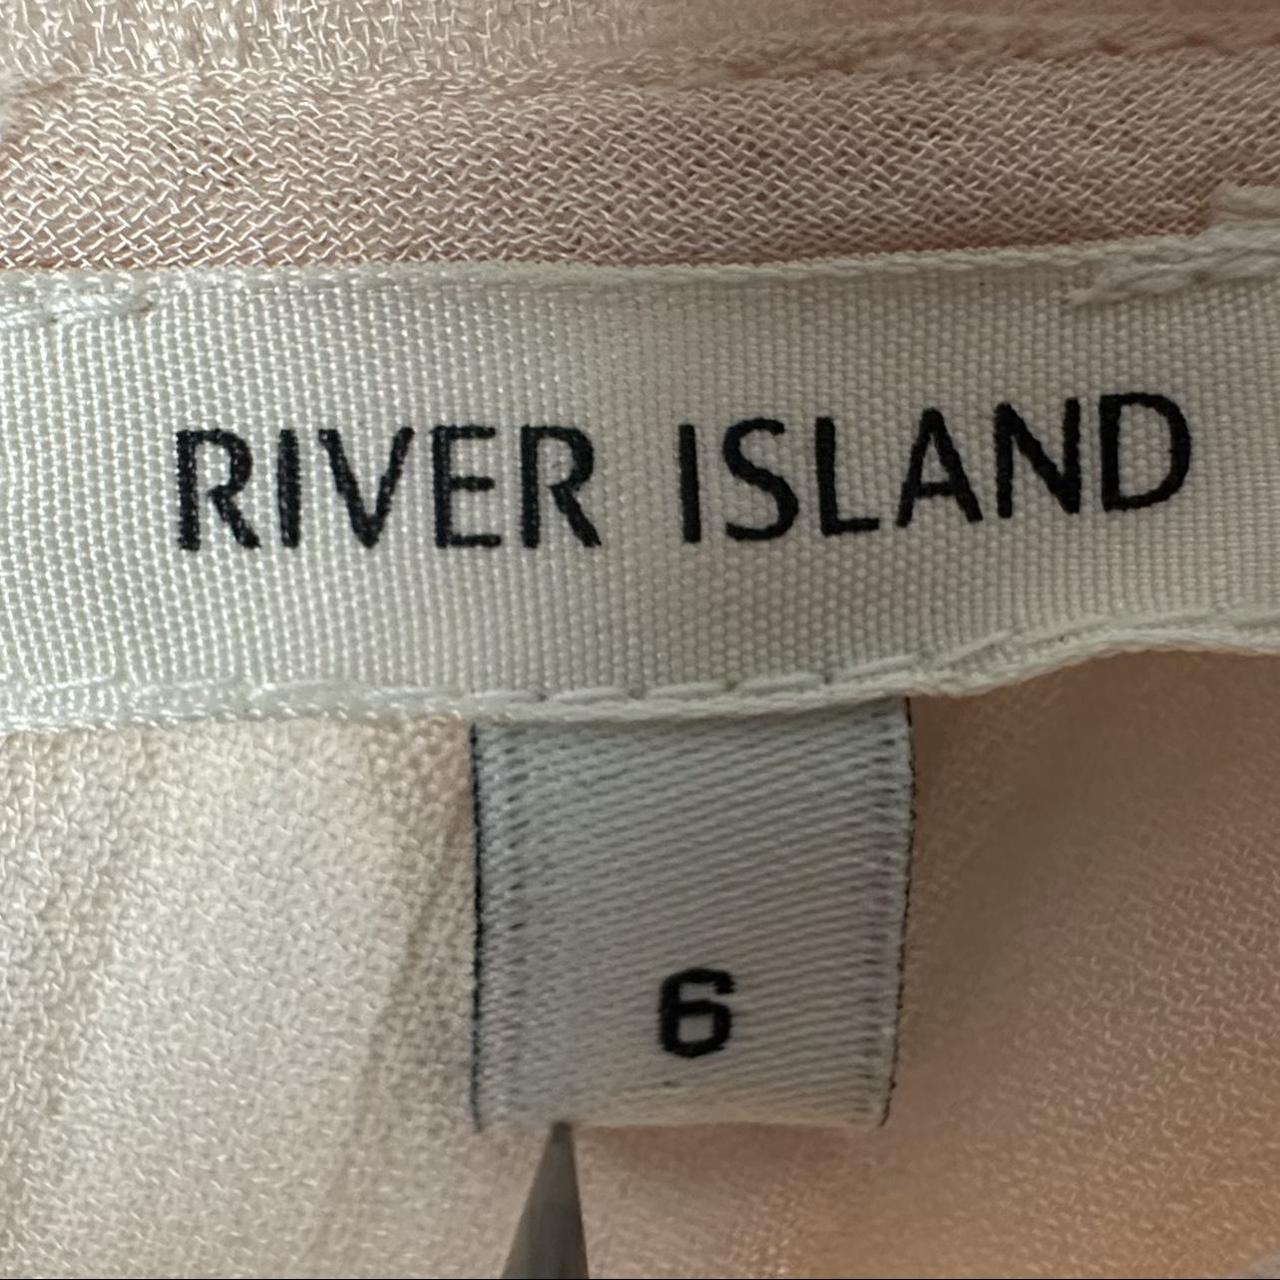 River Island Women's Cream and Pink Blouse | Depop